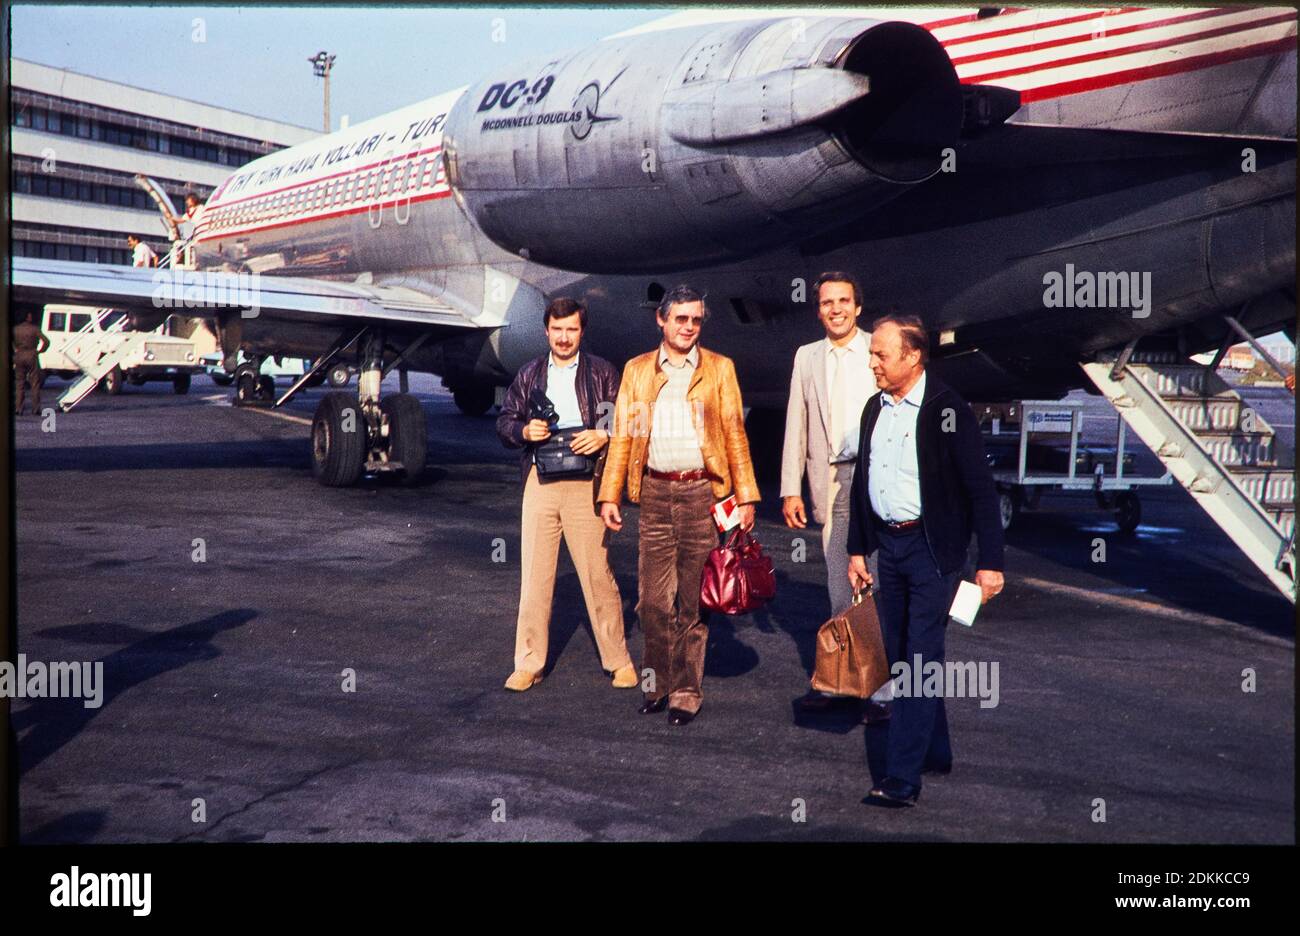 Historical Photo:  Group of business people at a McDonnell Douglas DC-9 Tuerk Hava Yollari Turkish Airline THY passenger jet around 1973 in Munich, Riem Airport on the way to Turkey. Reproduction in Marktoberdorf, Germany, October 26, 2020.  © Peter Schatz / Alamy Stock Photos Stock Photo